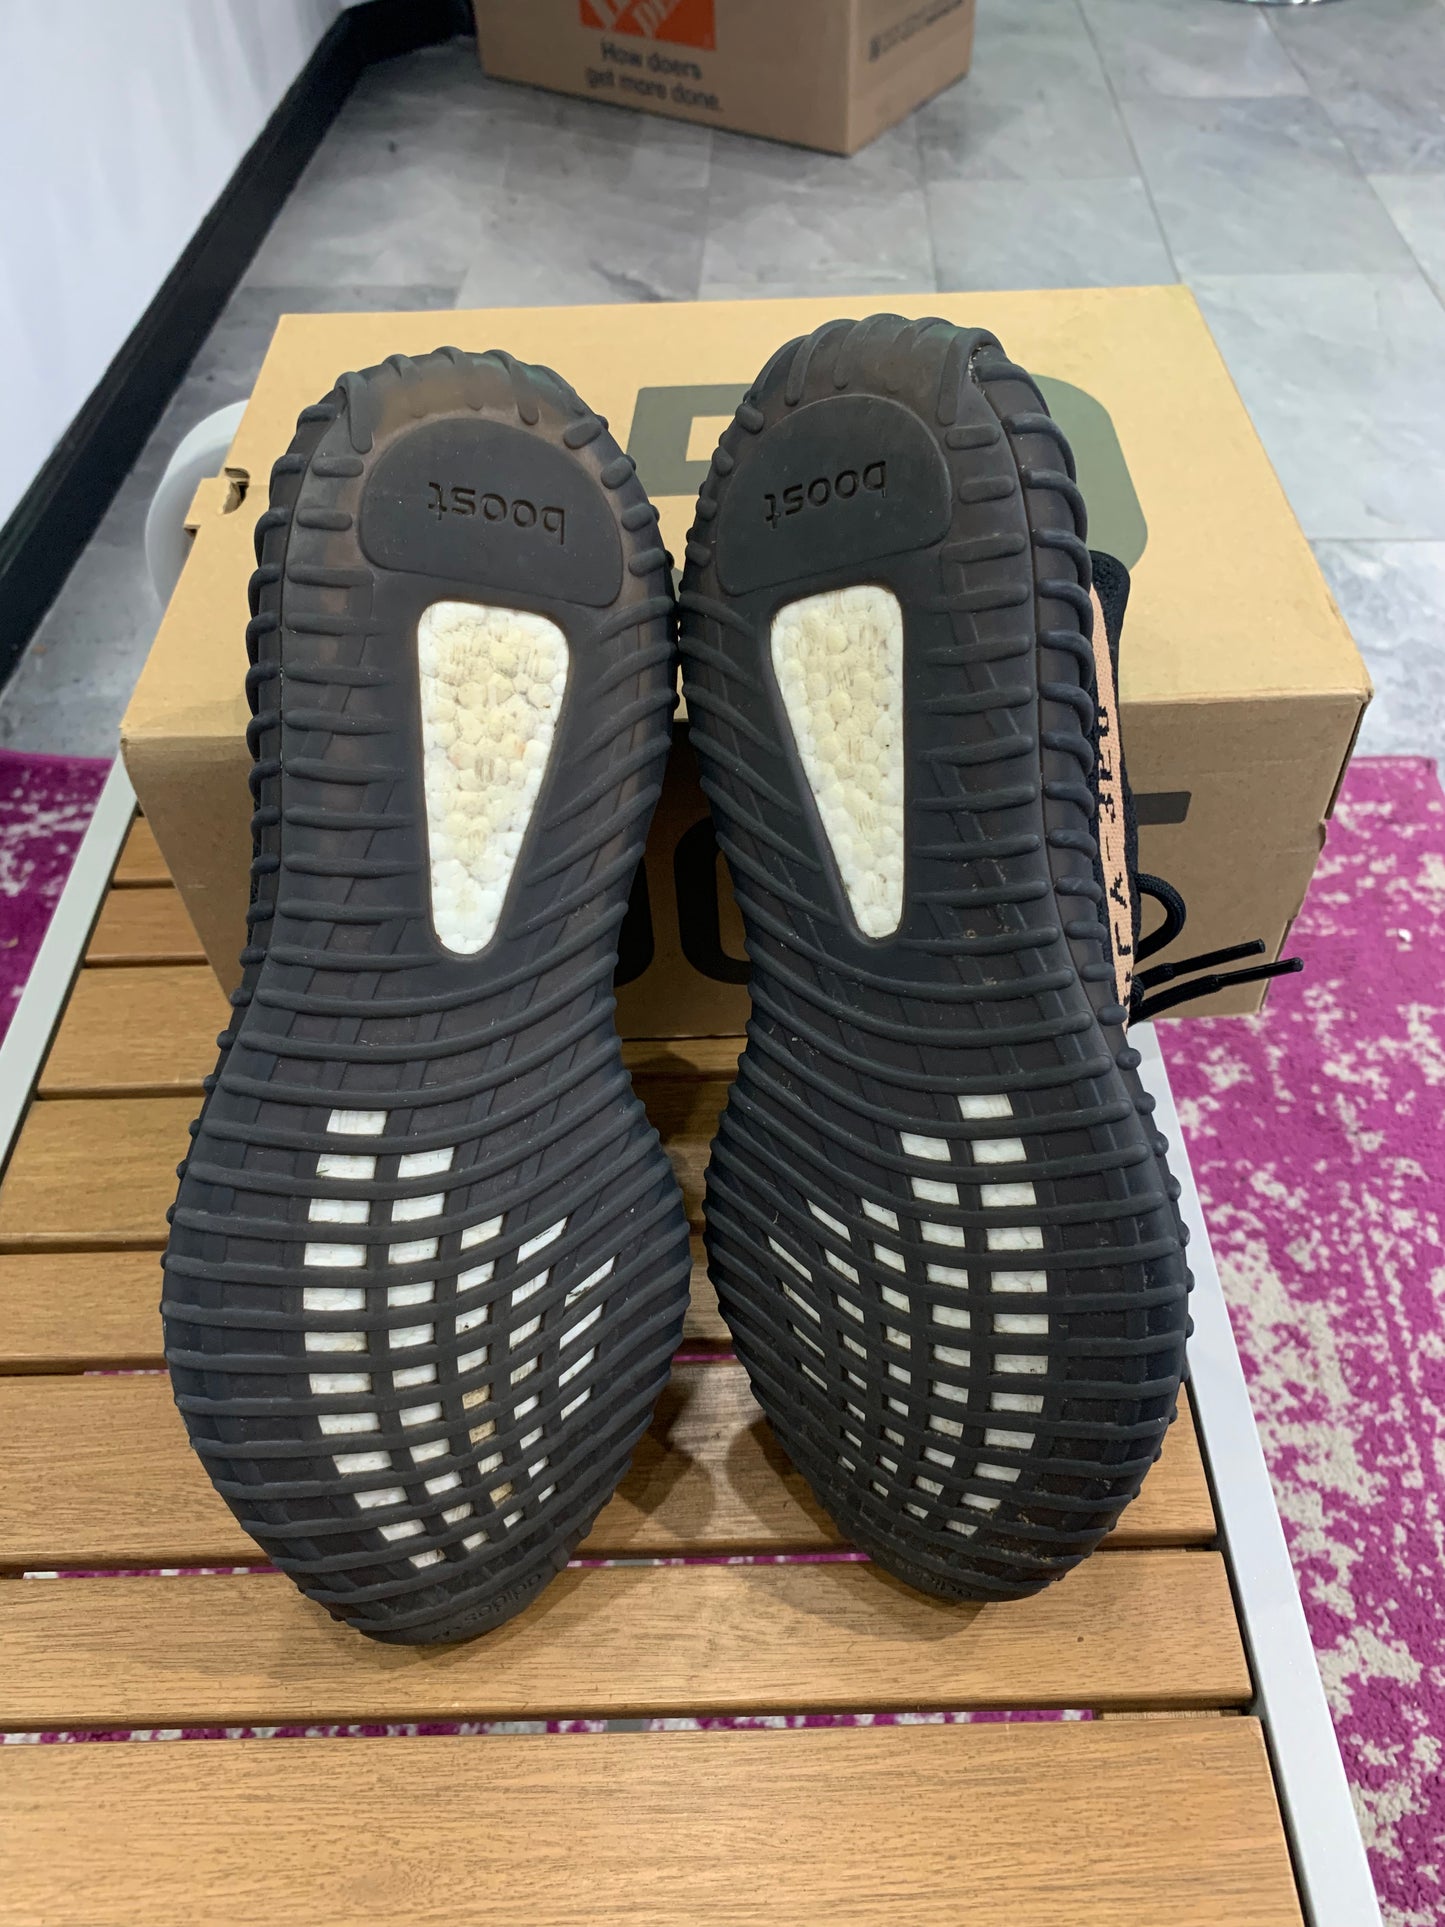 Yeezy Boost 350 Copper (USED)